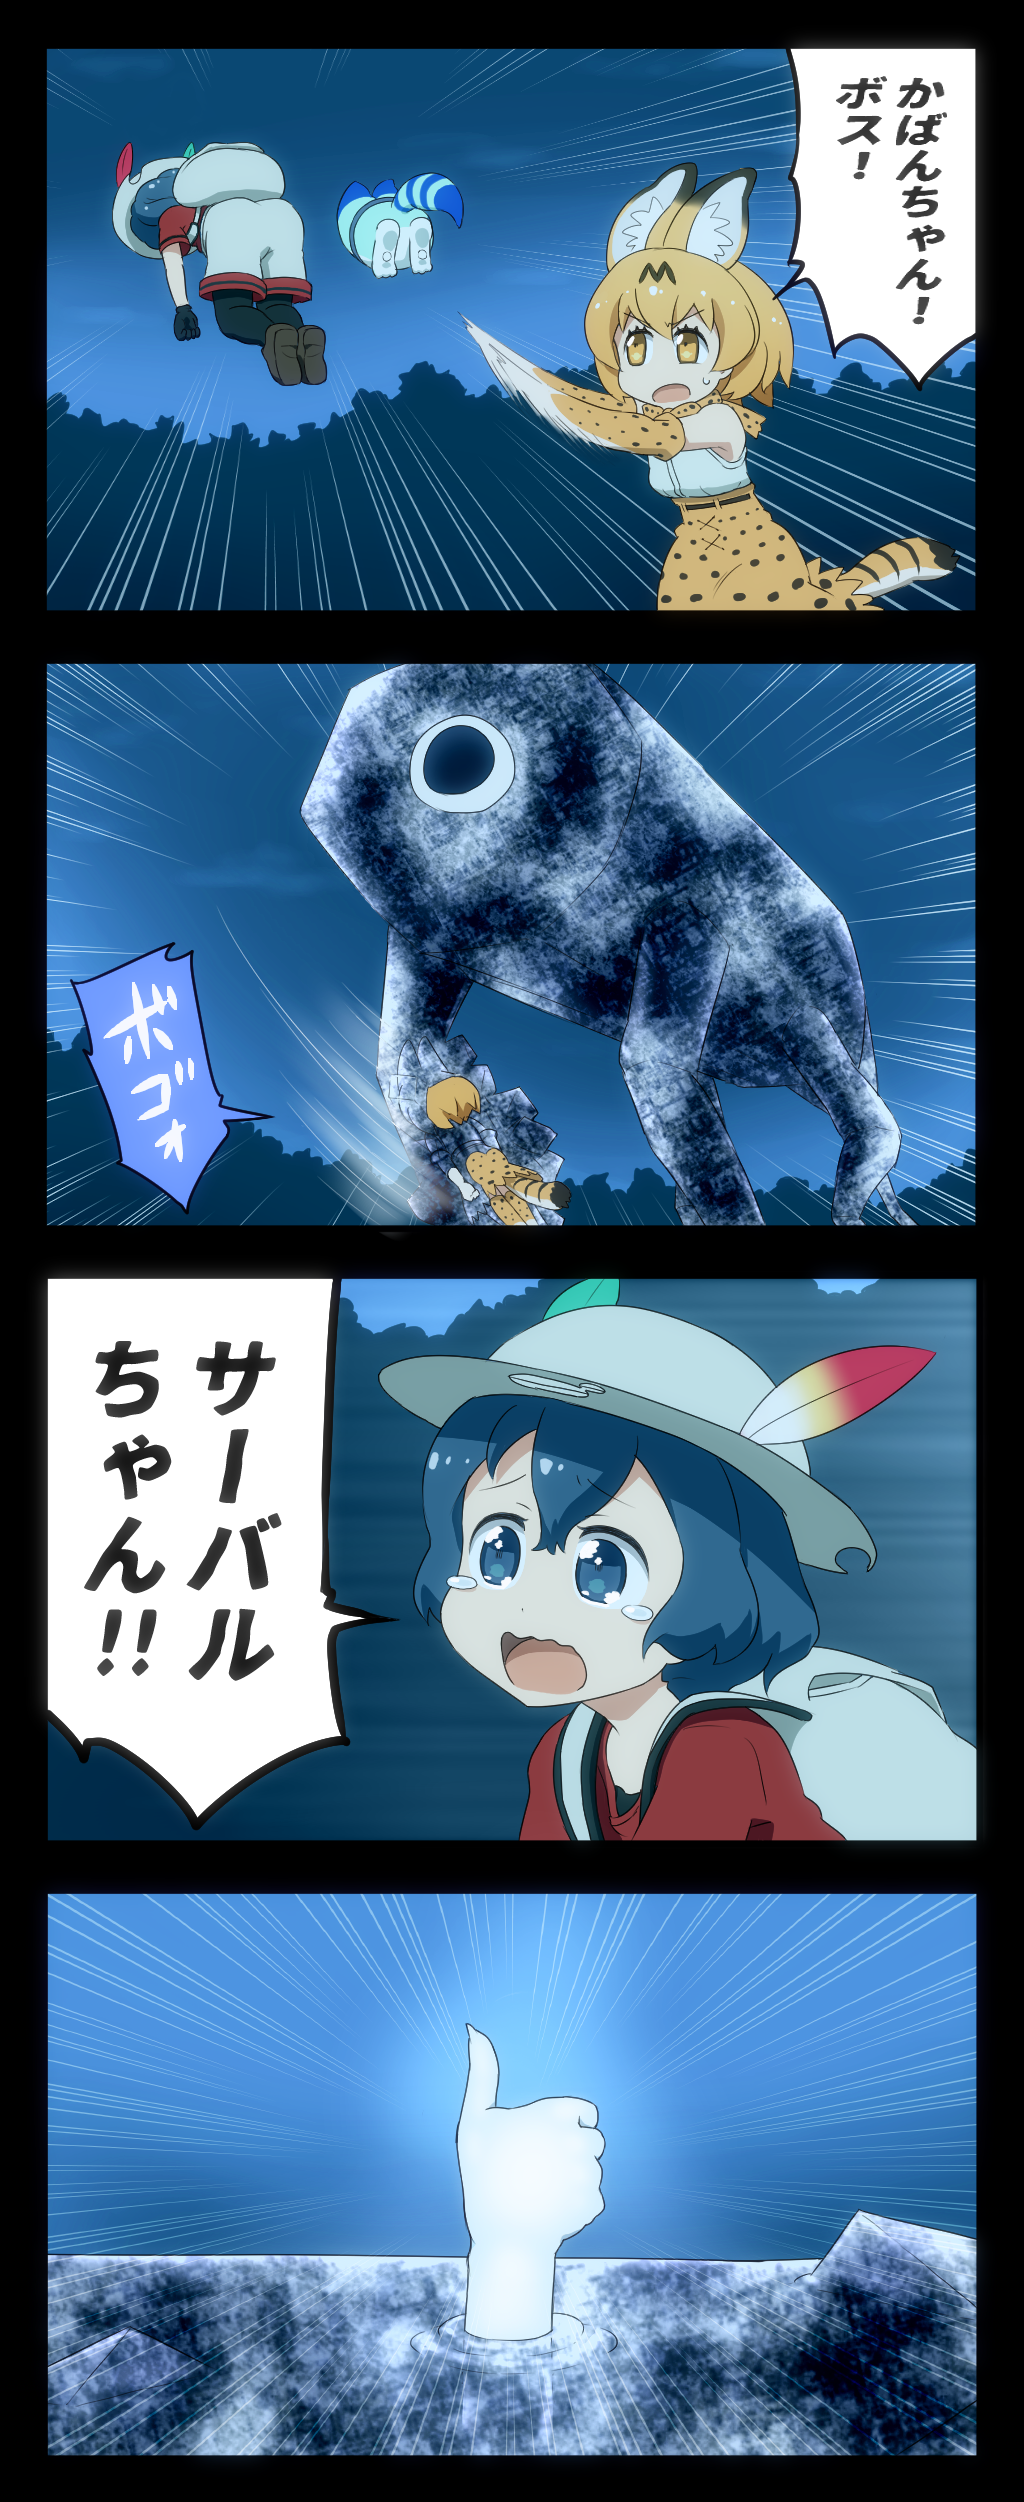 !! 2girls 4koma absurdres animal_ears black_cerulean_(kemono_friends) comic commentary highres kaban_(kemono_friends) kemono_friends lucky_beast_(kemono_friends) multiple_girls night open_mouth parody pushing_away sad serval_(kemono_friends) serval_ears serval_tail shirosato speech_bubble spoilers sweatdrop tail tears terminator terminator_2:_judgement_day thumbs_up translated wavy_mouth